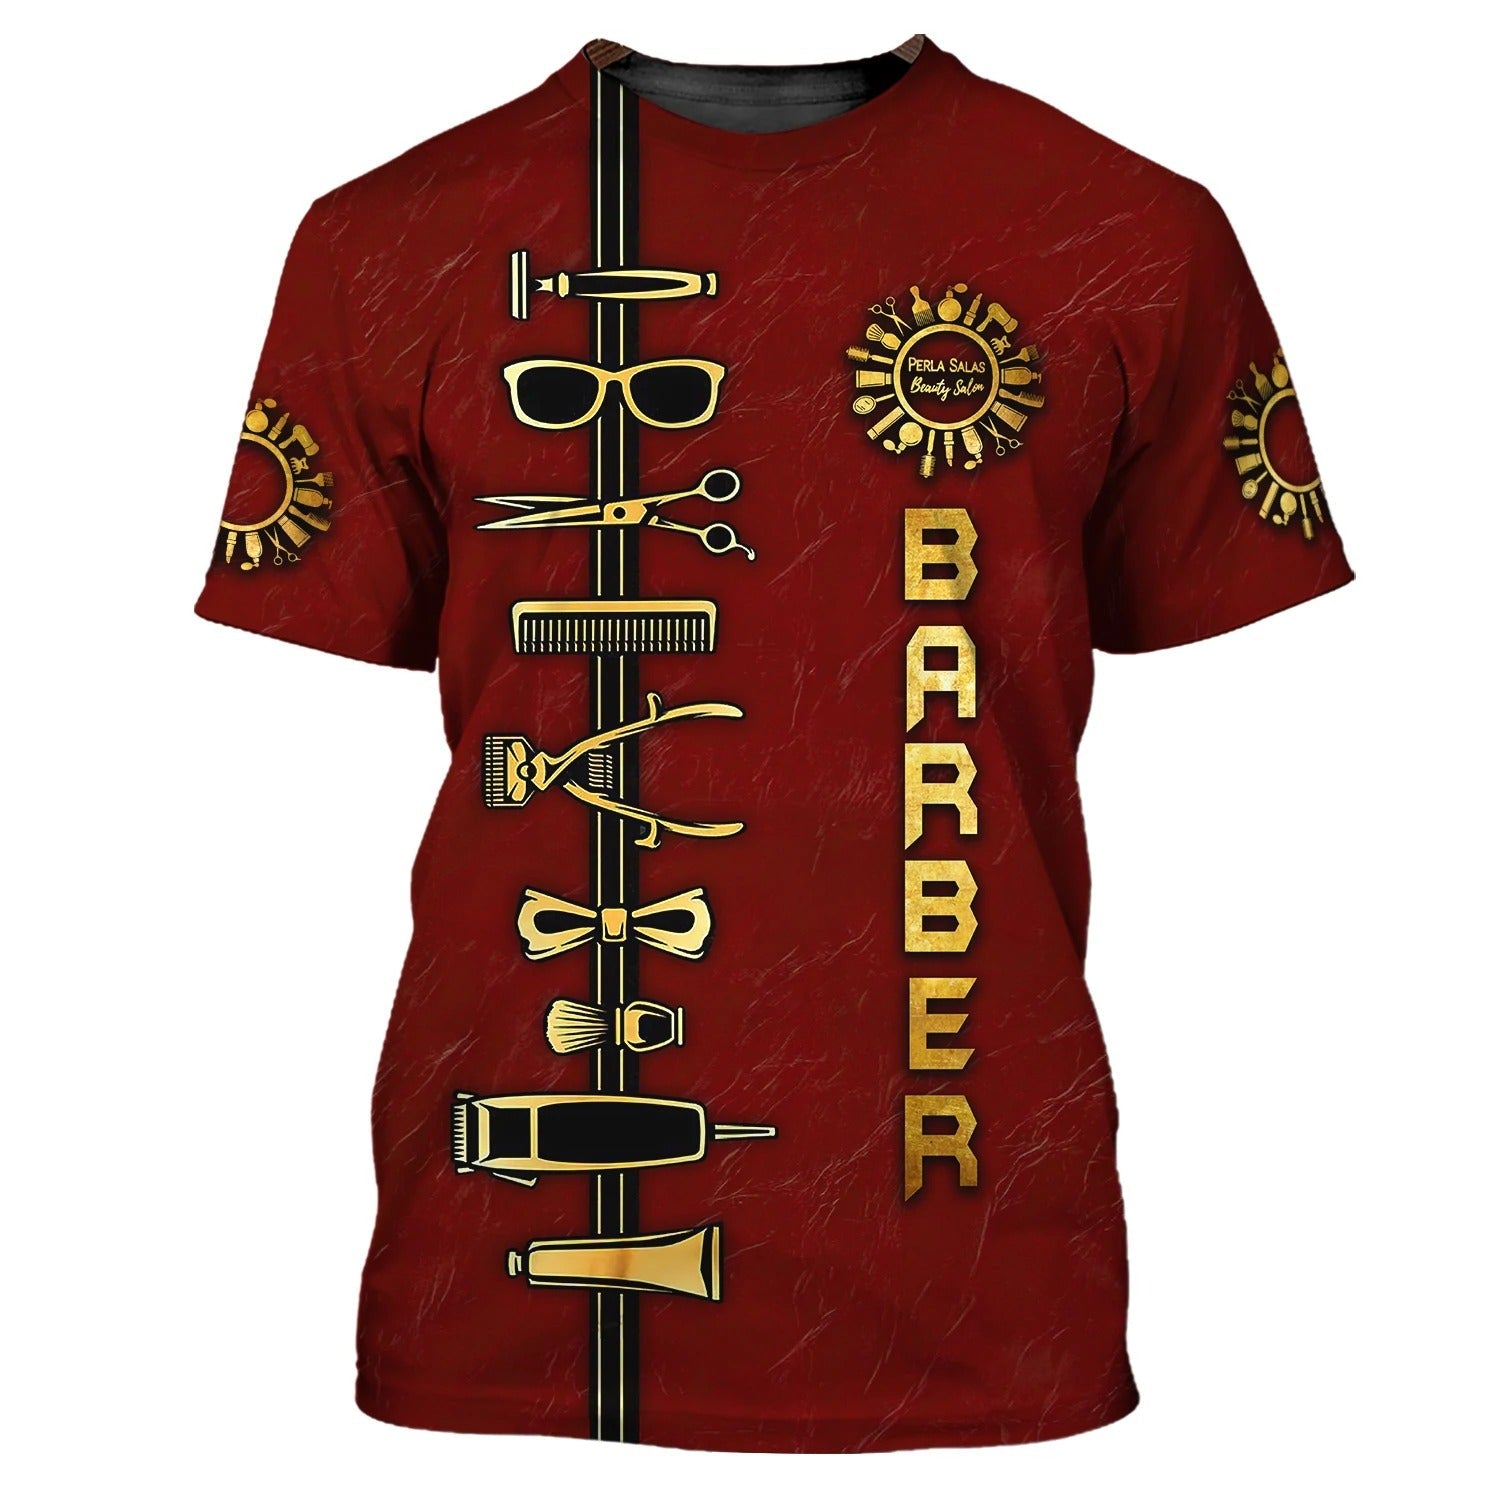 Personalized 3D Tshirt For Baber/ Beauty Salon Barber Shirts/ Best Gift For A Baber Man/ Barber Shirt For Him